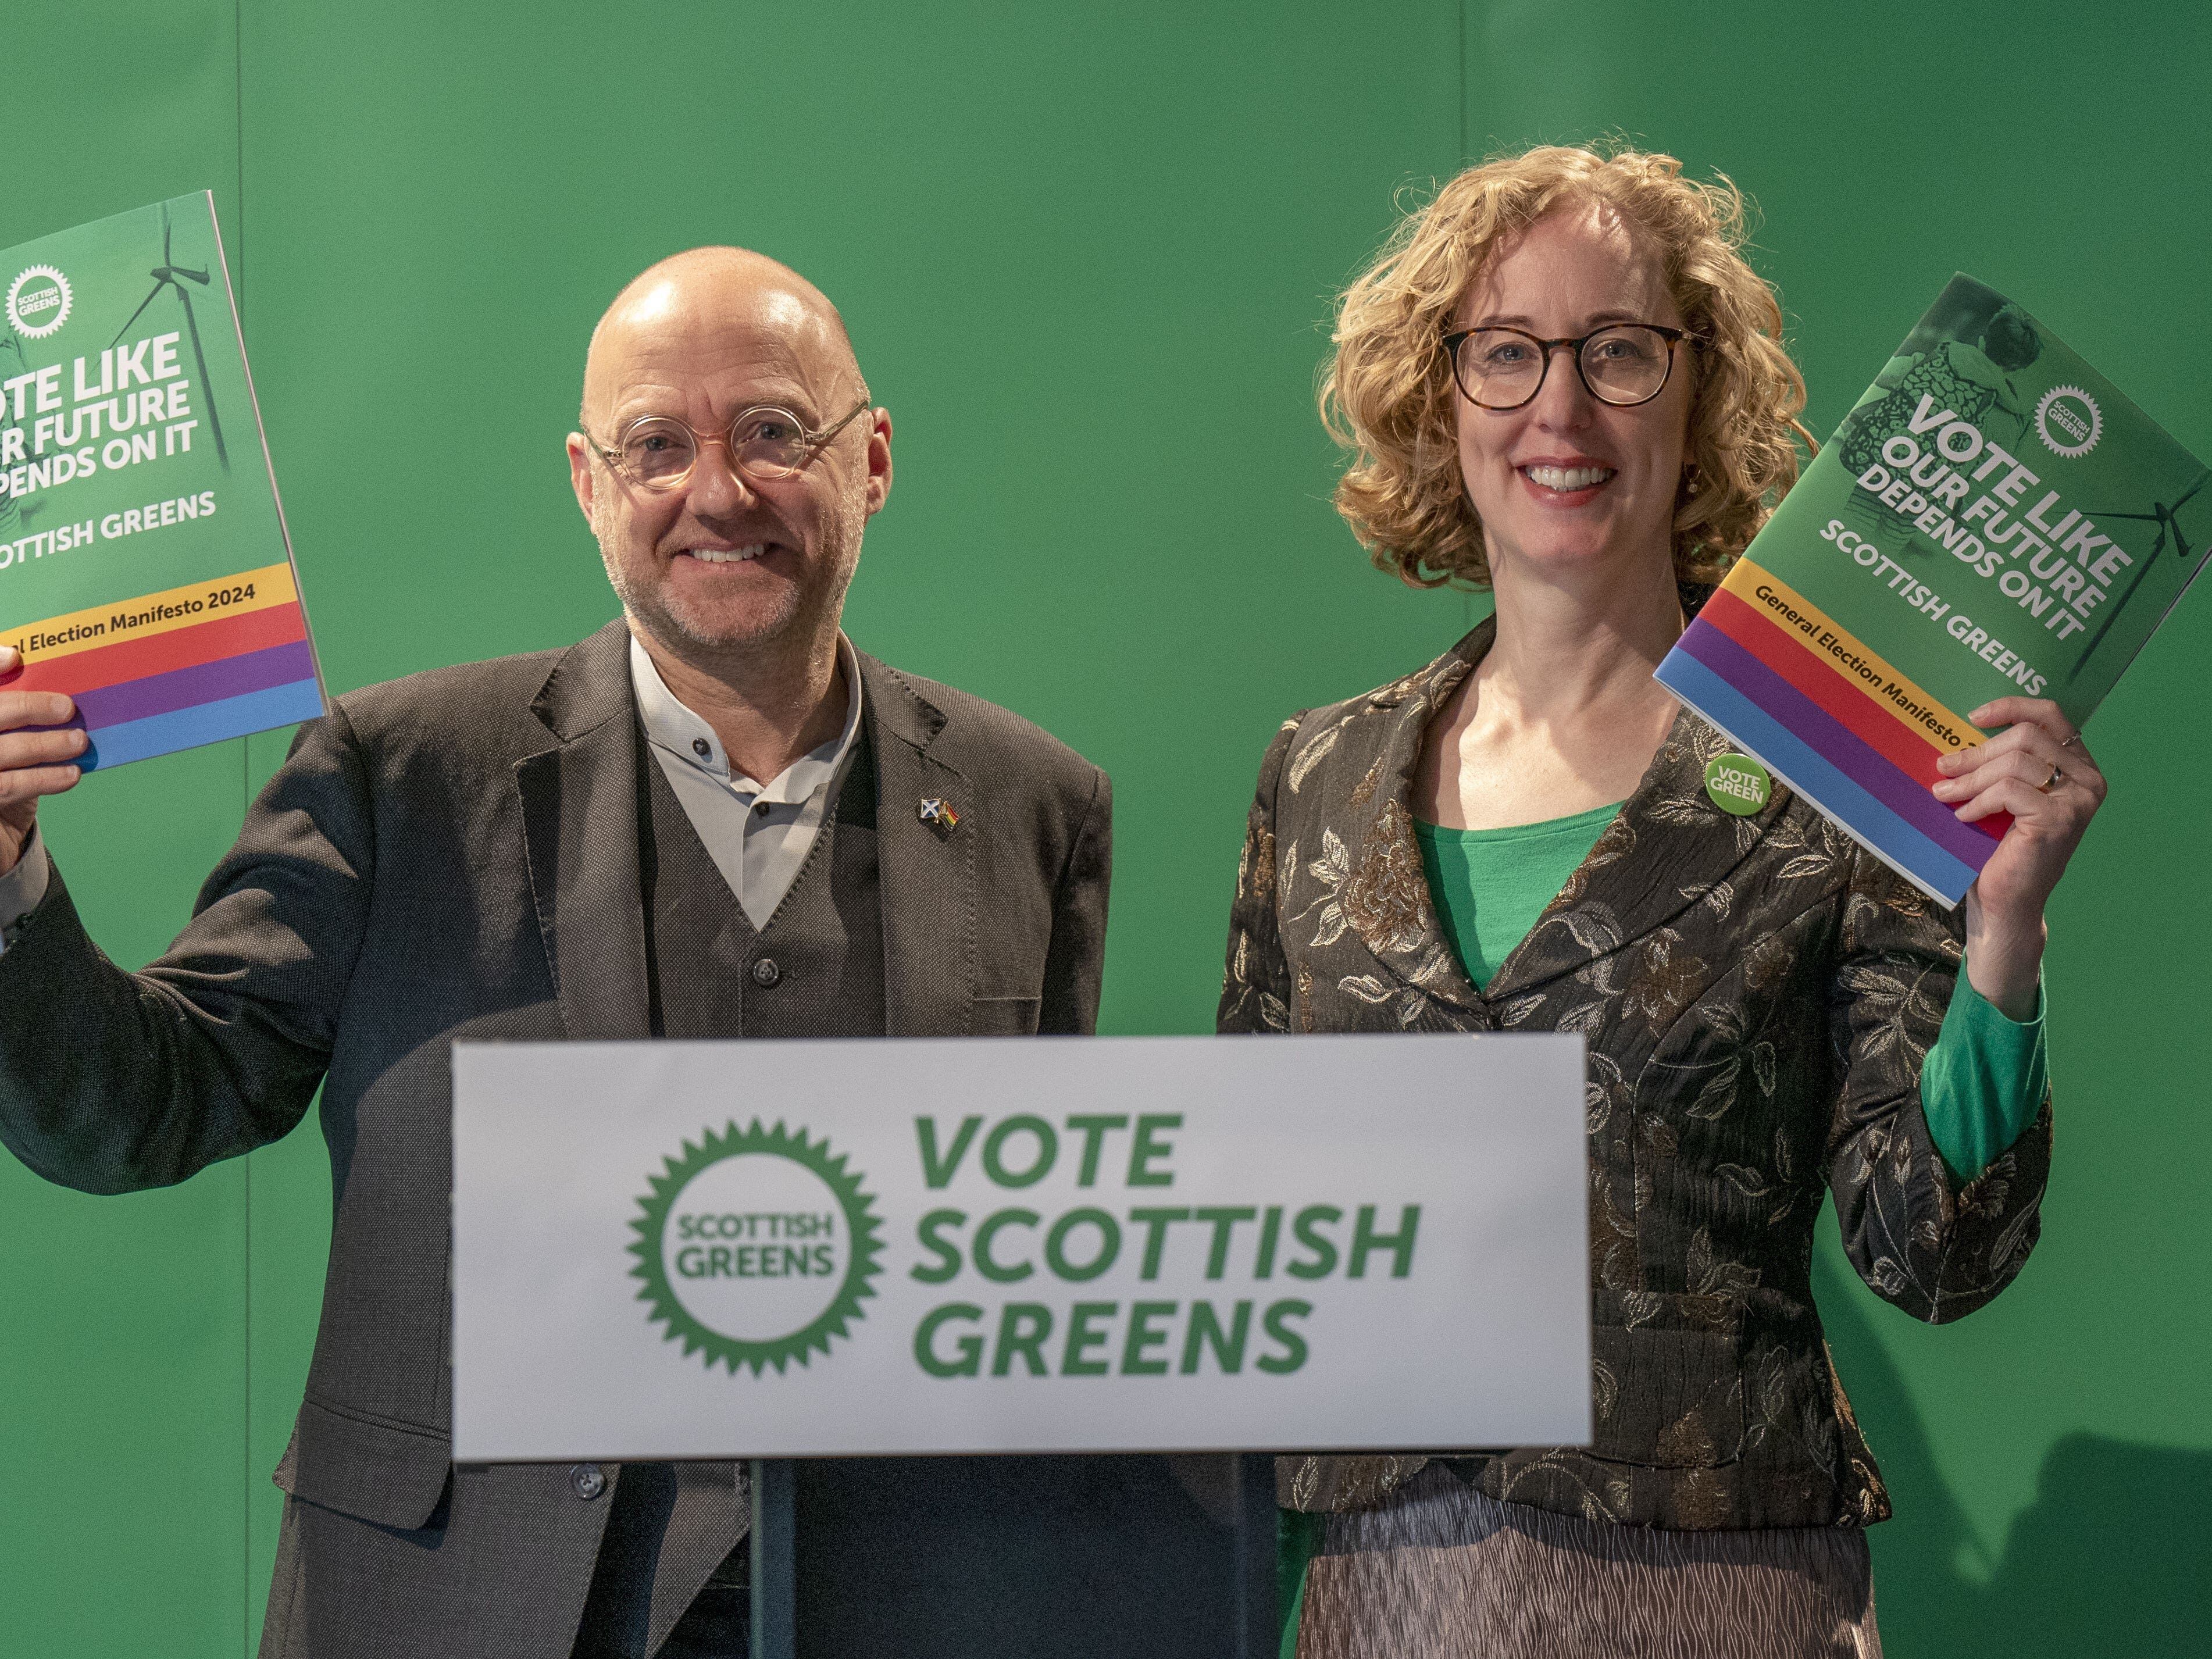 Tories have shifted towards ‘right-wing extremism’ since Brexit, claims Harvie